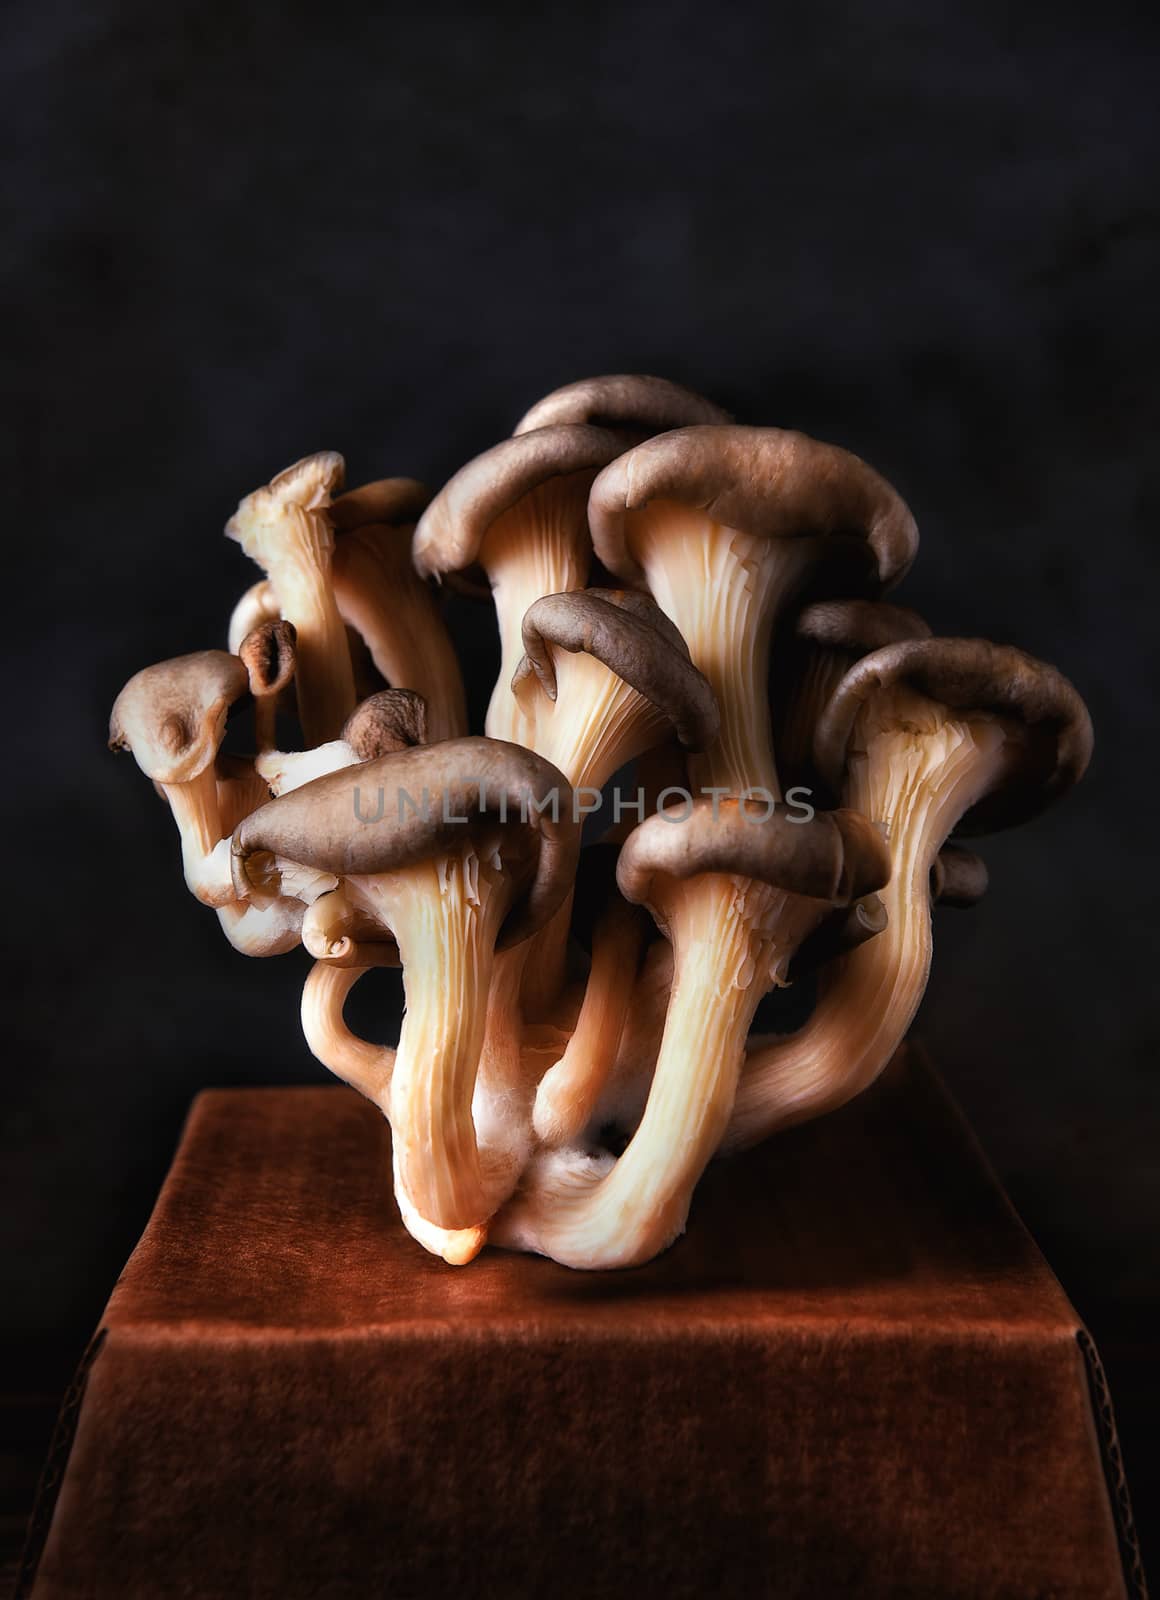  A cluster of Oyster mushrooms (Pleurotus ostreatus) on a brown cardboard box with a mottled dark gray background. The oyster mushroom is frequently used in Japanese, Korean and Chinese cuisine as a delicacy. Vertical format with copy space.